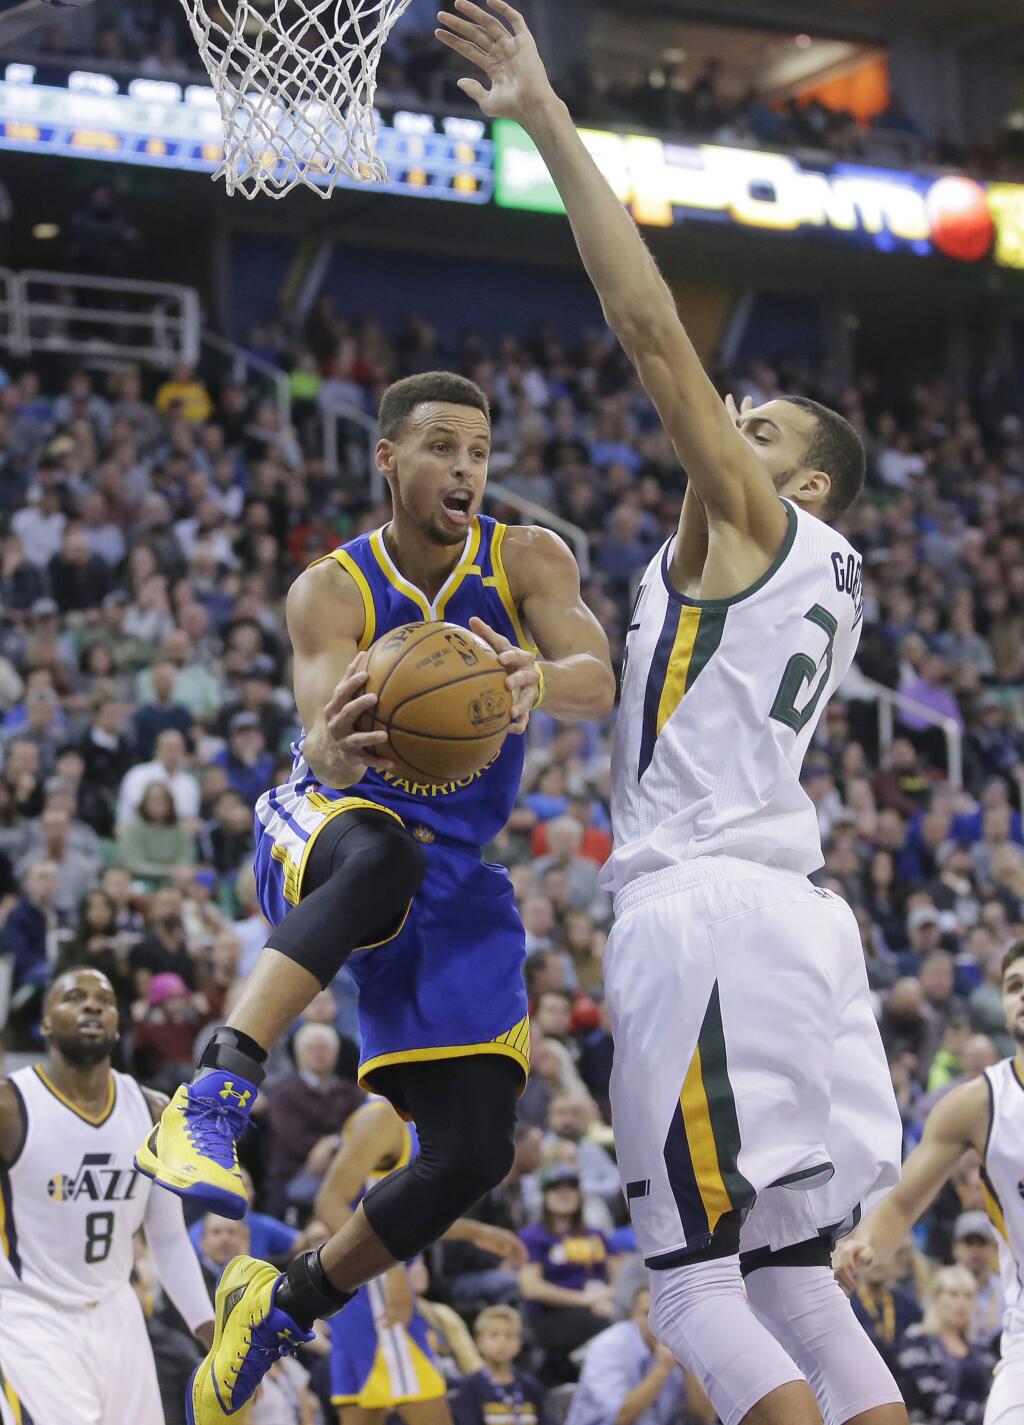 Golden State Warriors guard Stephen Curry, left, passes the ball as Utah Jazz center Rudy Gobert, right, defends in the first half during an NBA basketball game Thursday, Dec. 8, 2016, in Salt Lake City. (AP Photo/Rick Bowmer)